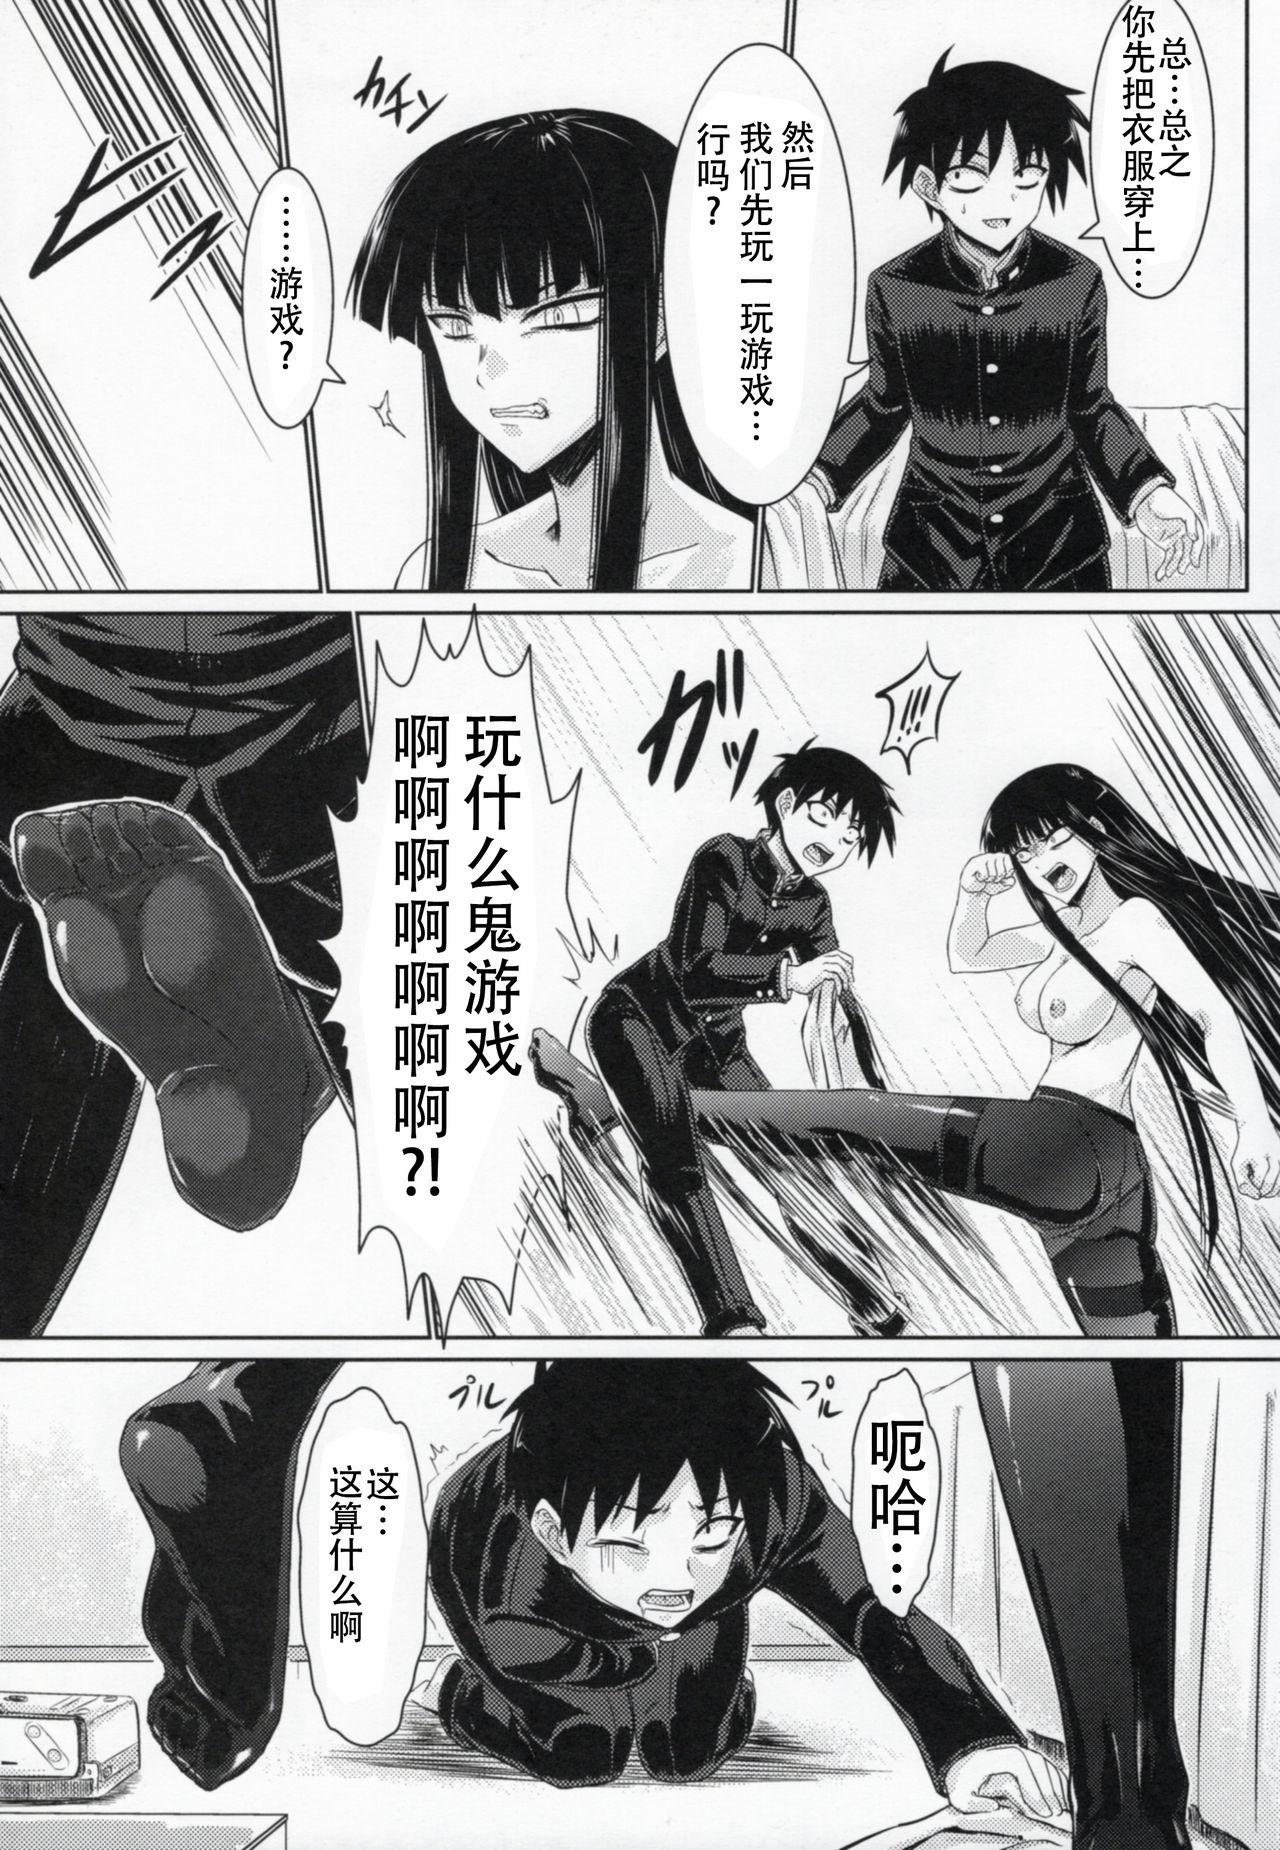 Gaydudes Houkago Sex 3 - Houkago play The - Page 5